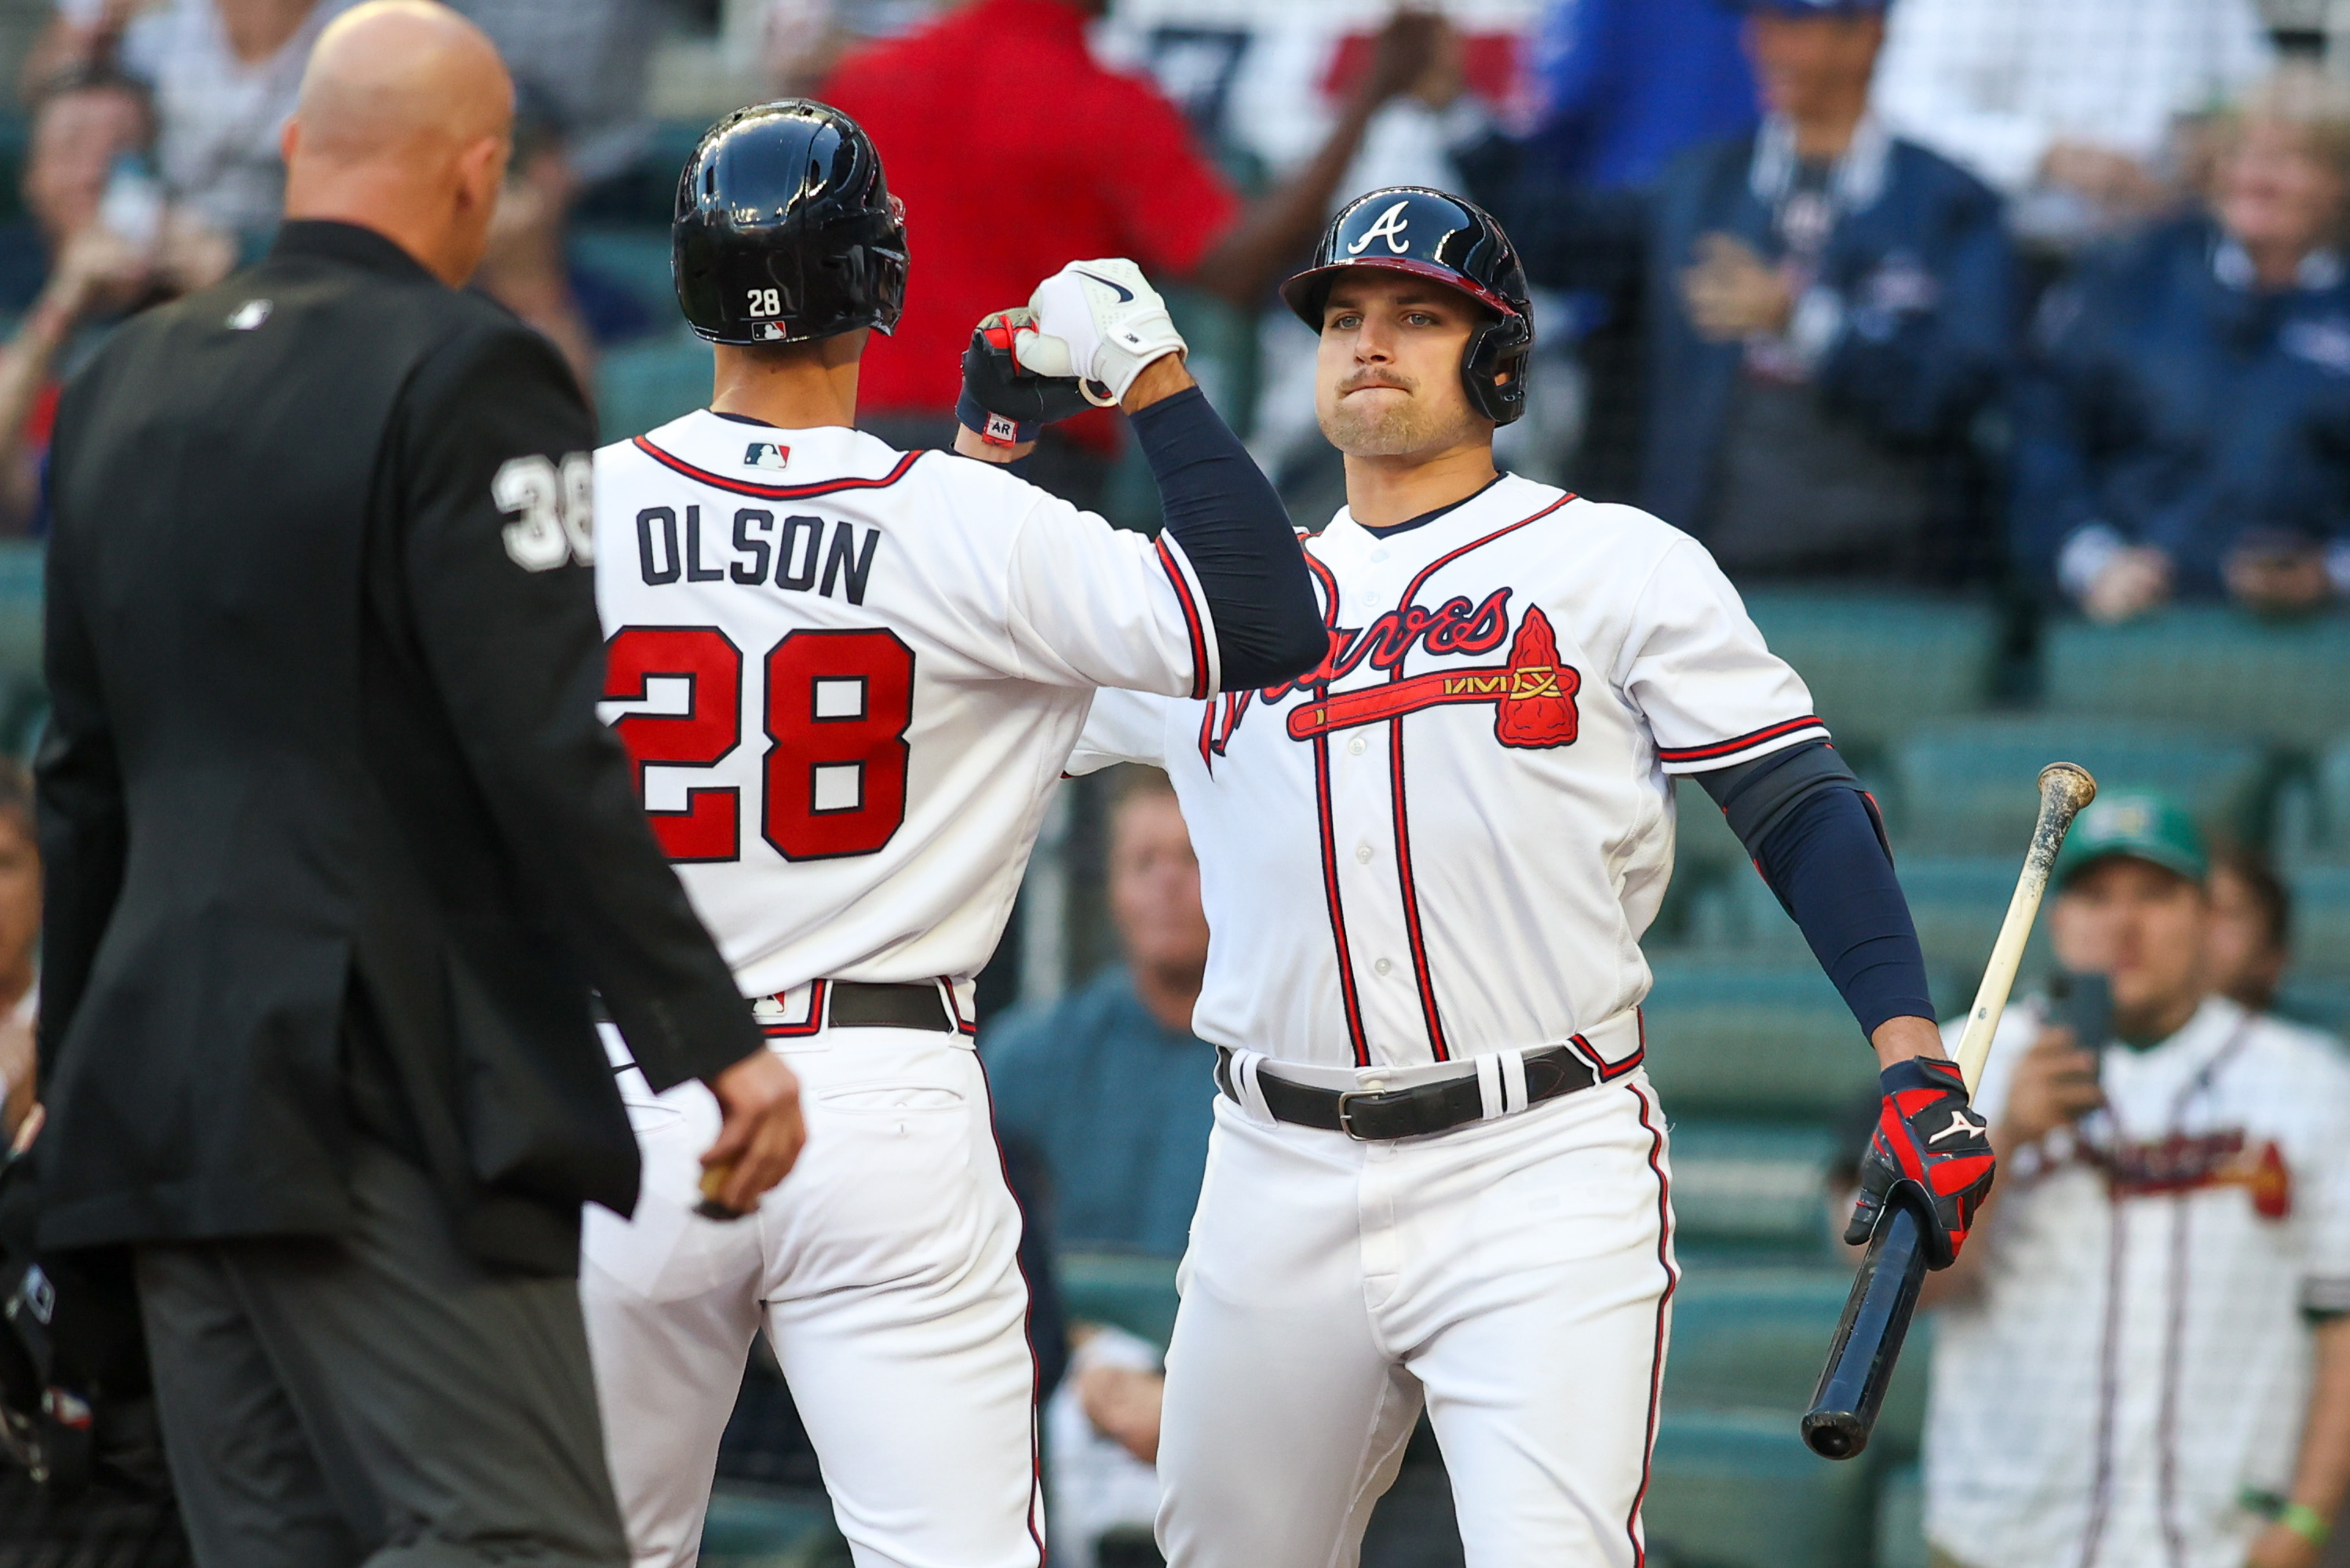 Matt Olson: Austin Riley is one of the most underrated players